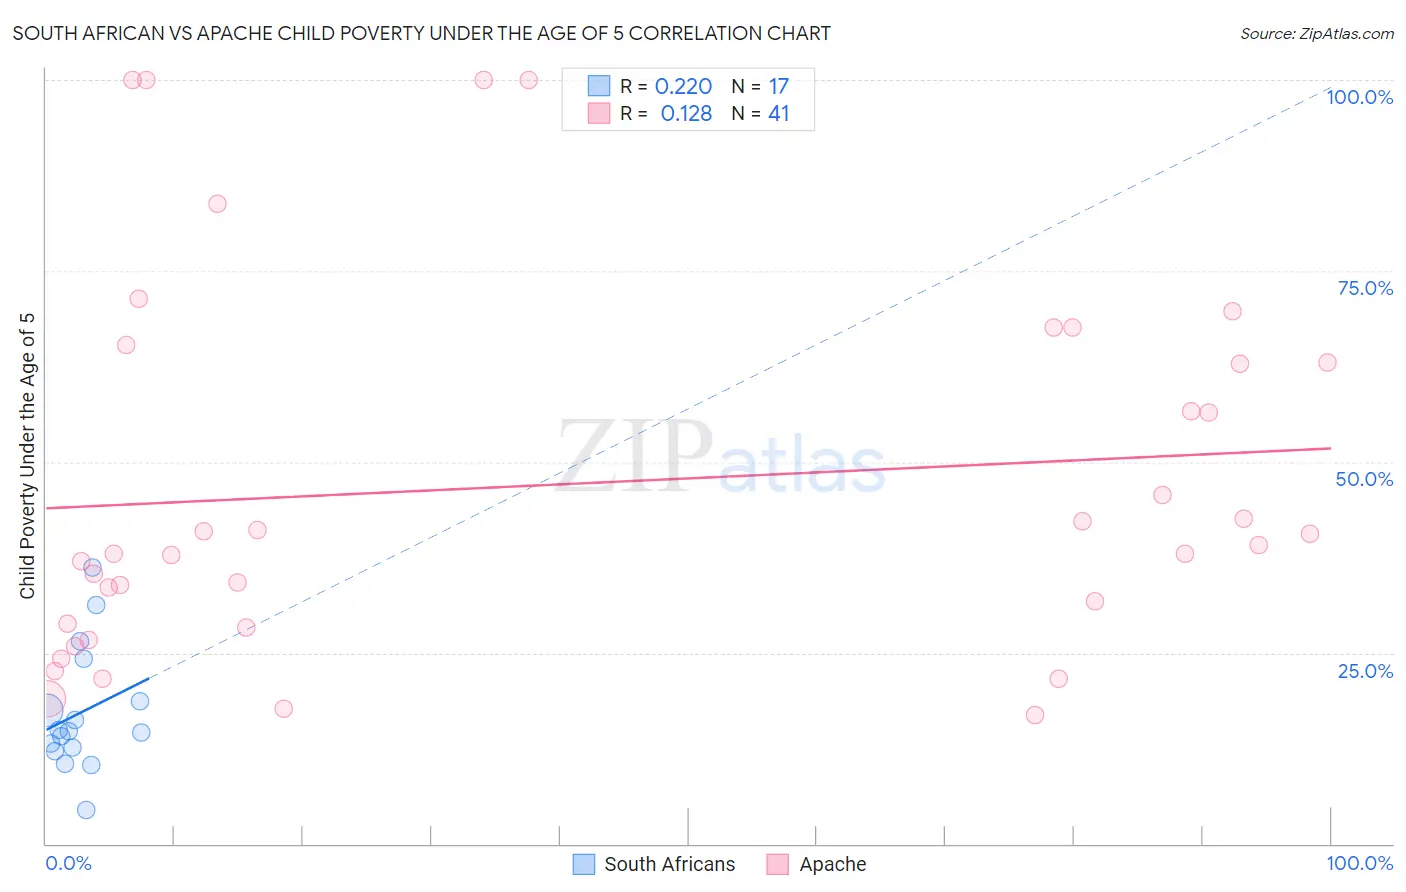 South African vs Apache Child Poverty Under the Age of 5